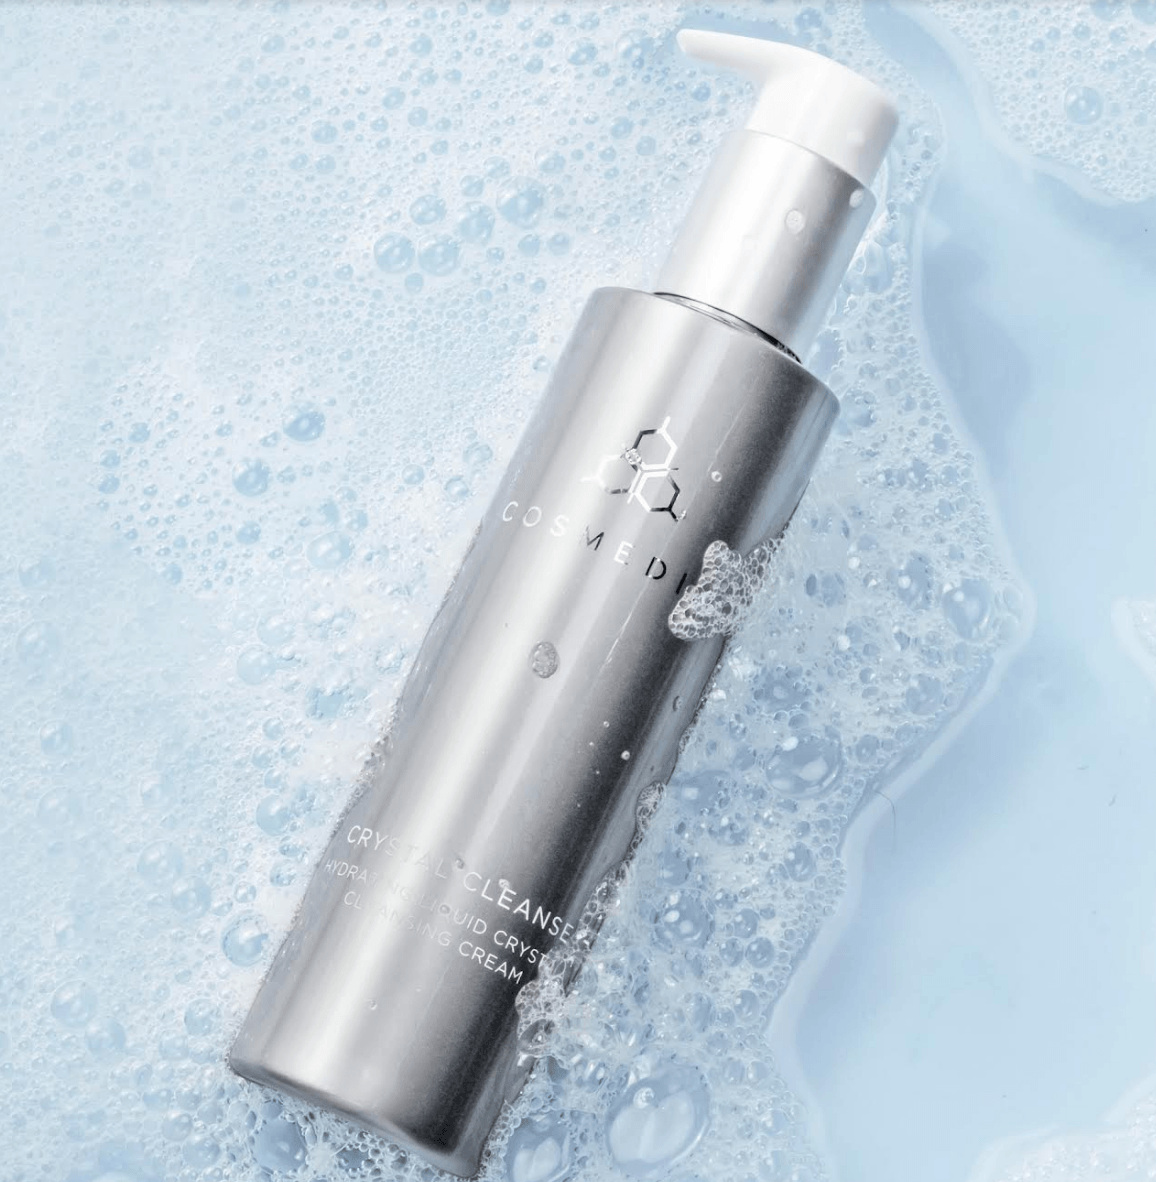 COSMEDIX Crystal Cleanse NEW CLEANSER - Exquisite Laser Clinic